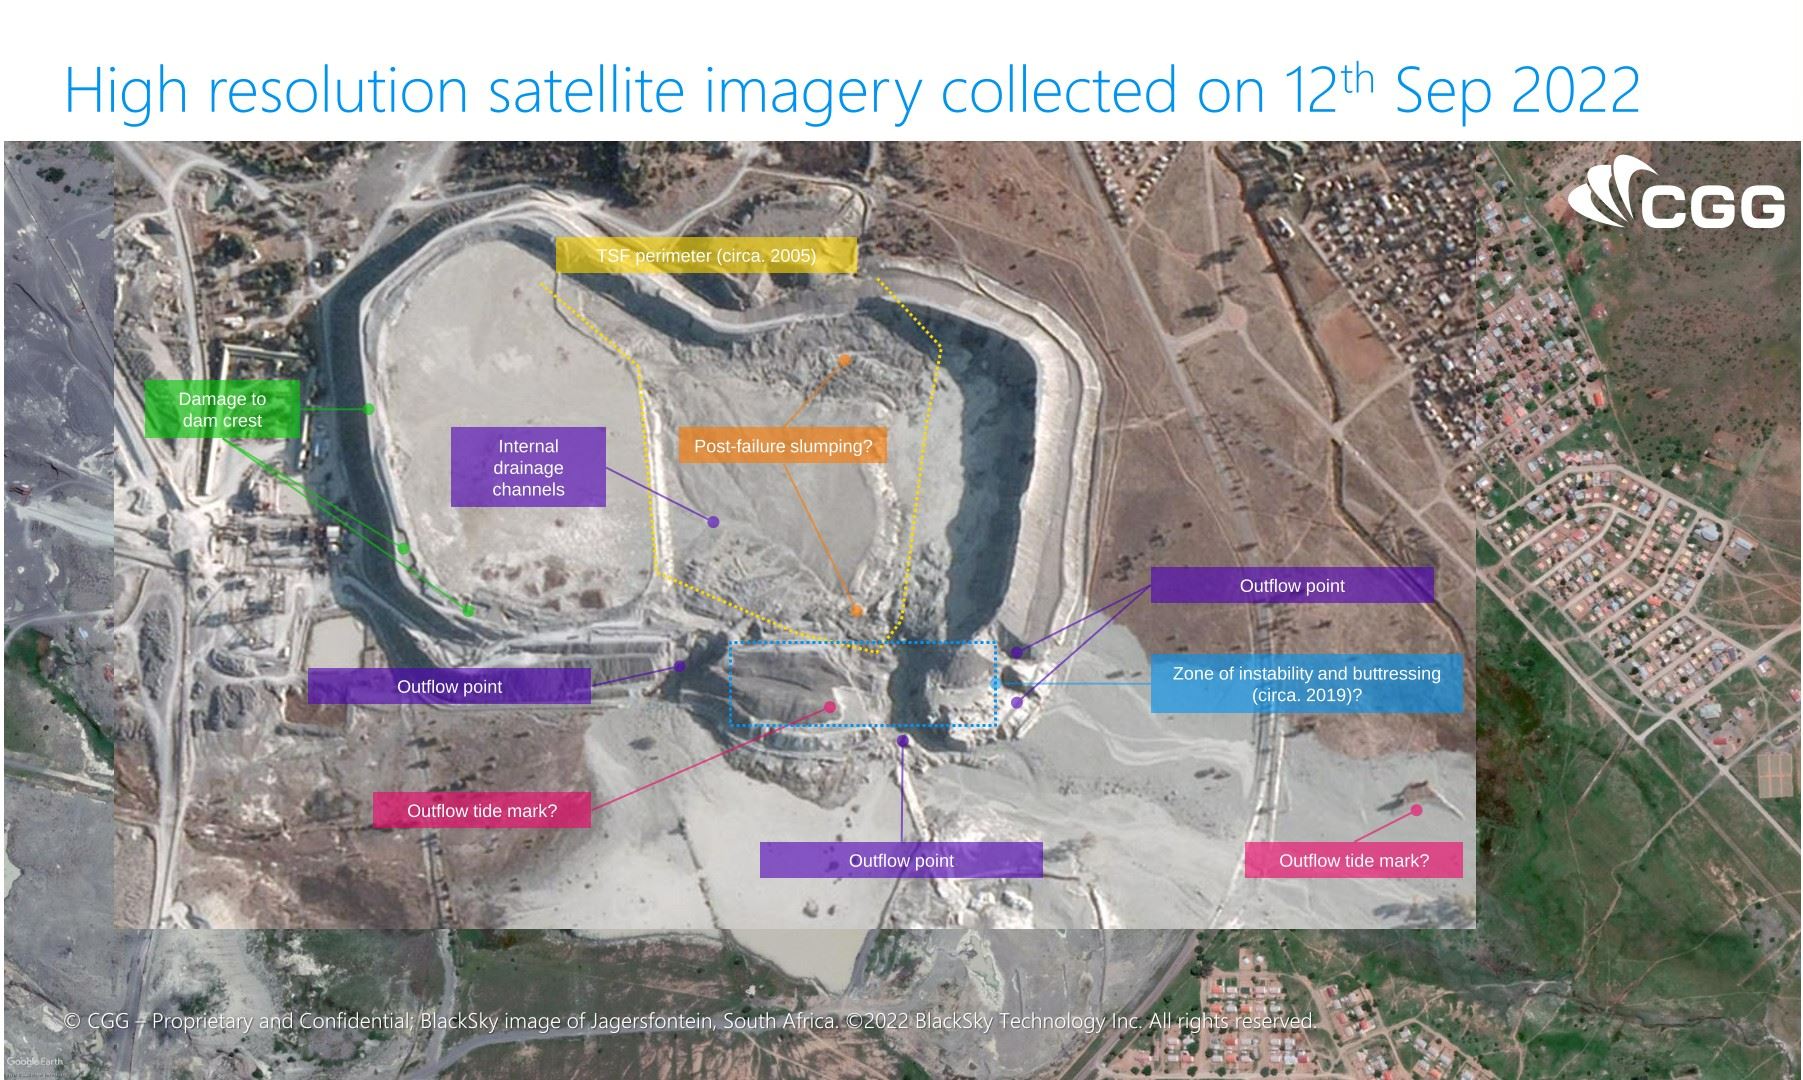 A high resolution satellite image of the aftermath of the Jagersfontein Tailings Storage Facility failure. 